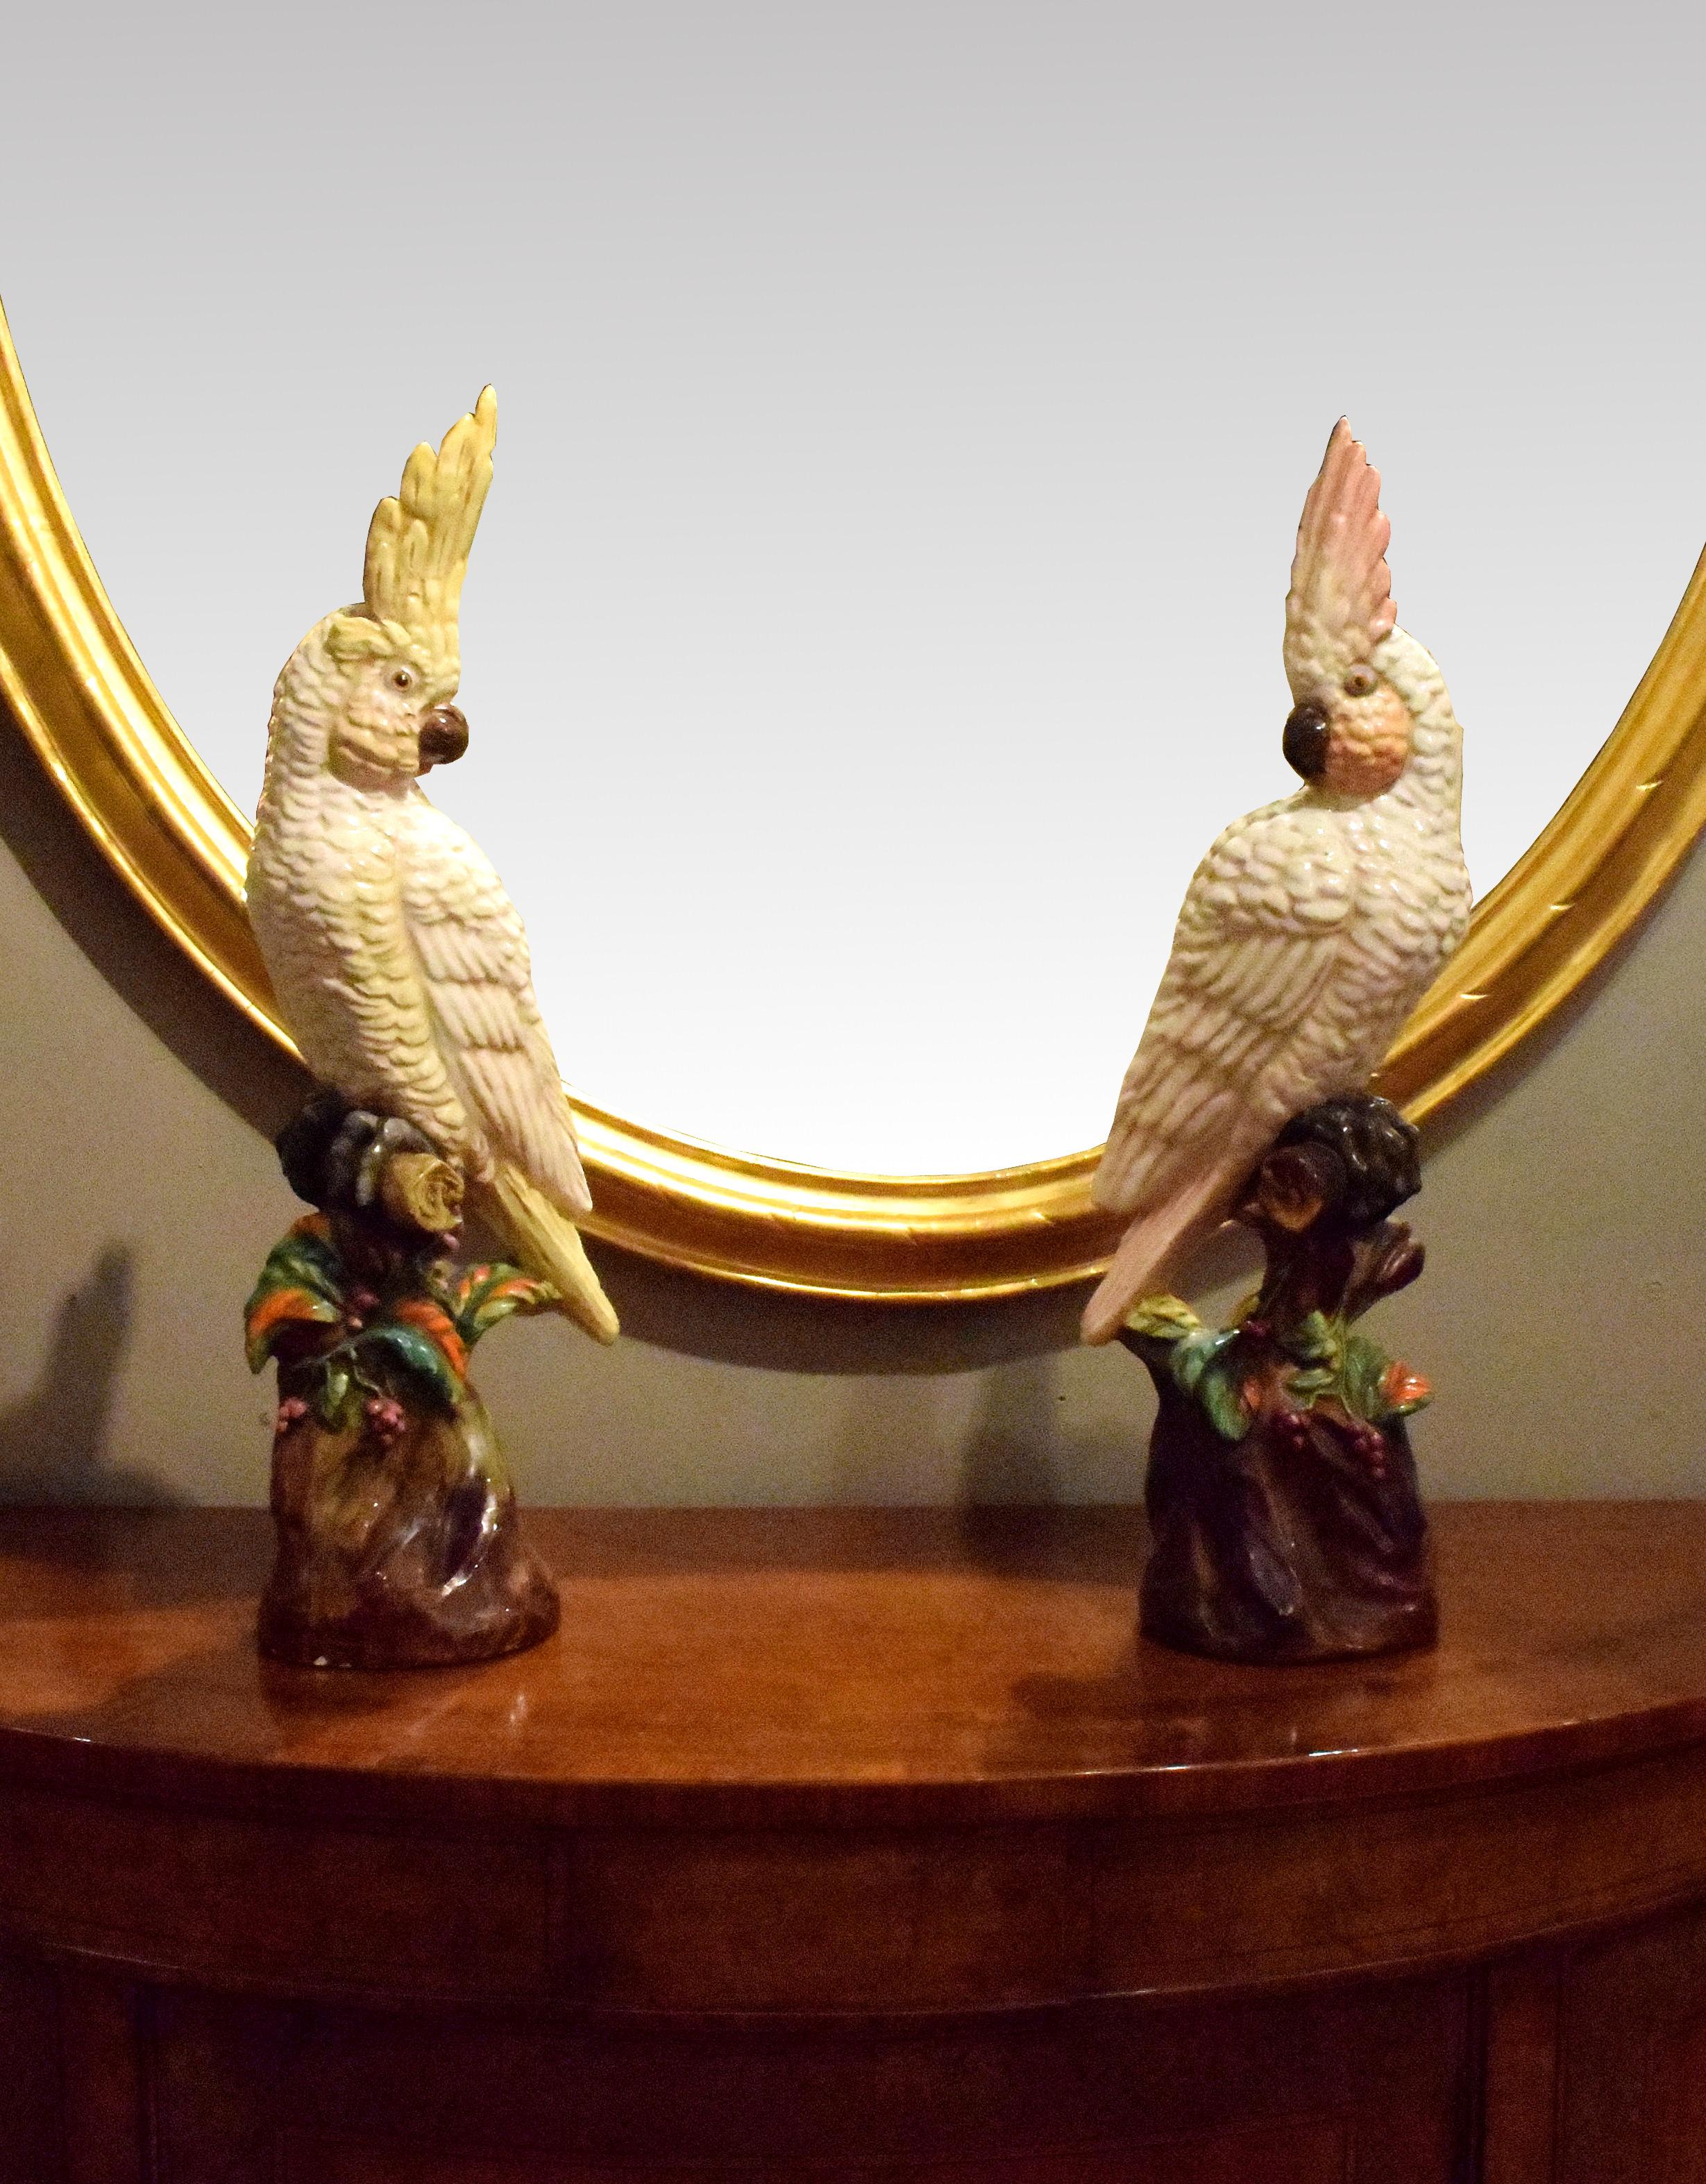 High Victorian 19th Century Ceramic Animalier Sculpture of a Pair of Cockatoos